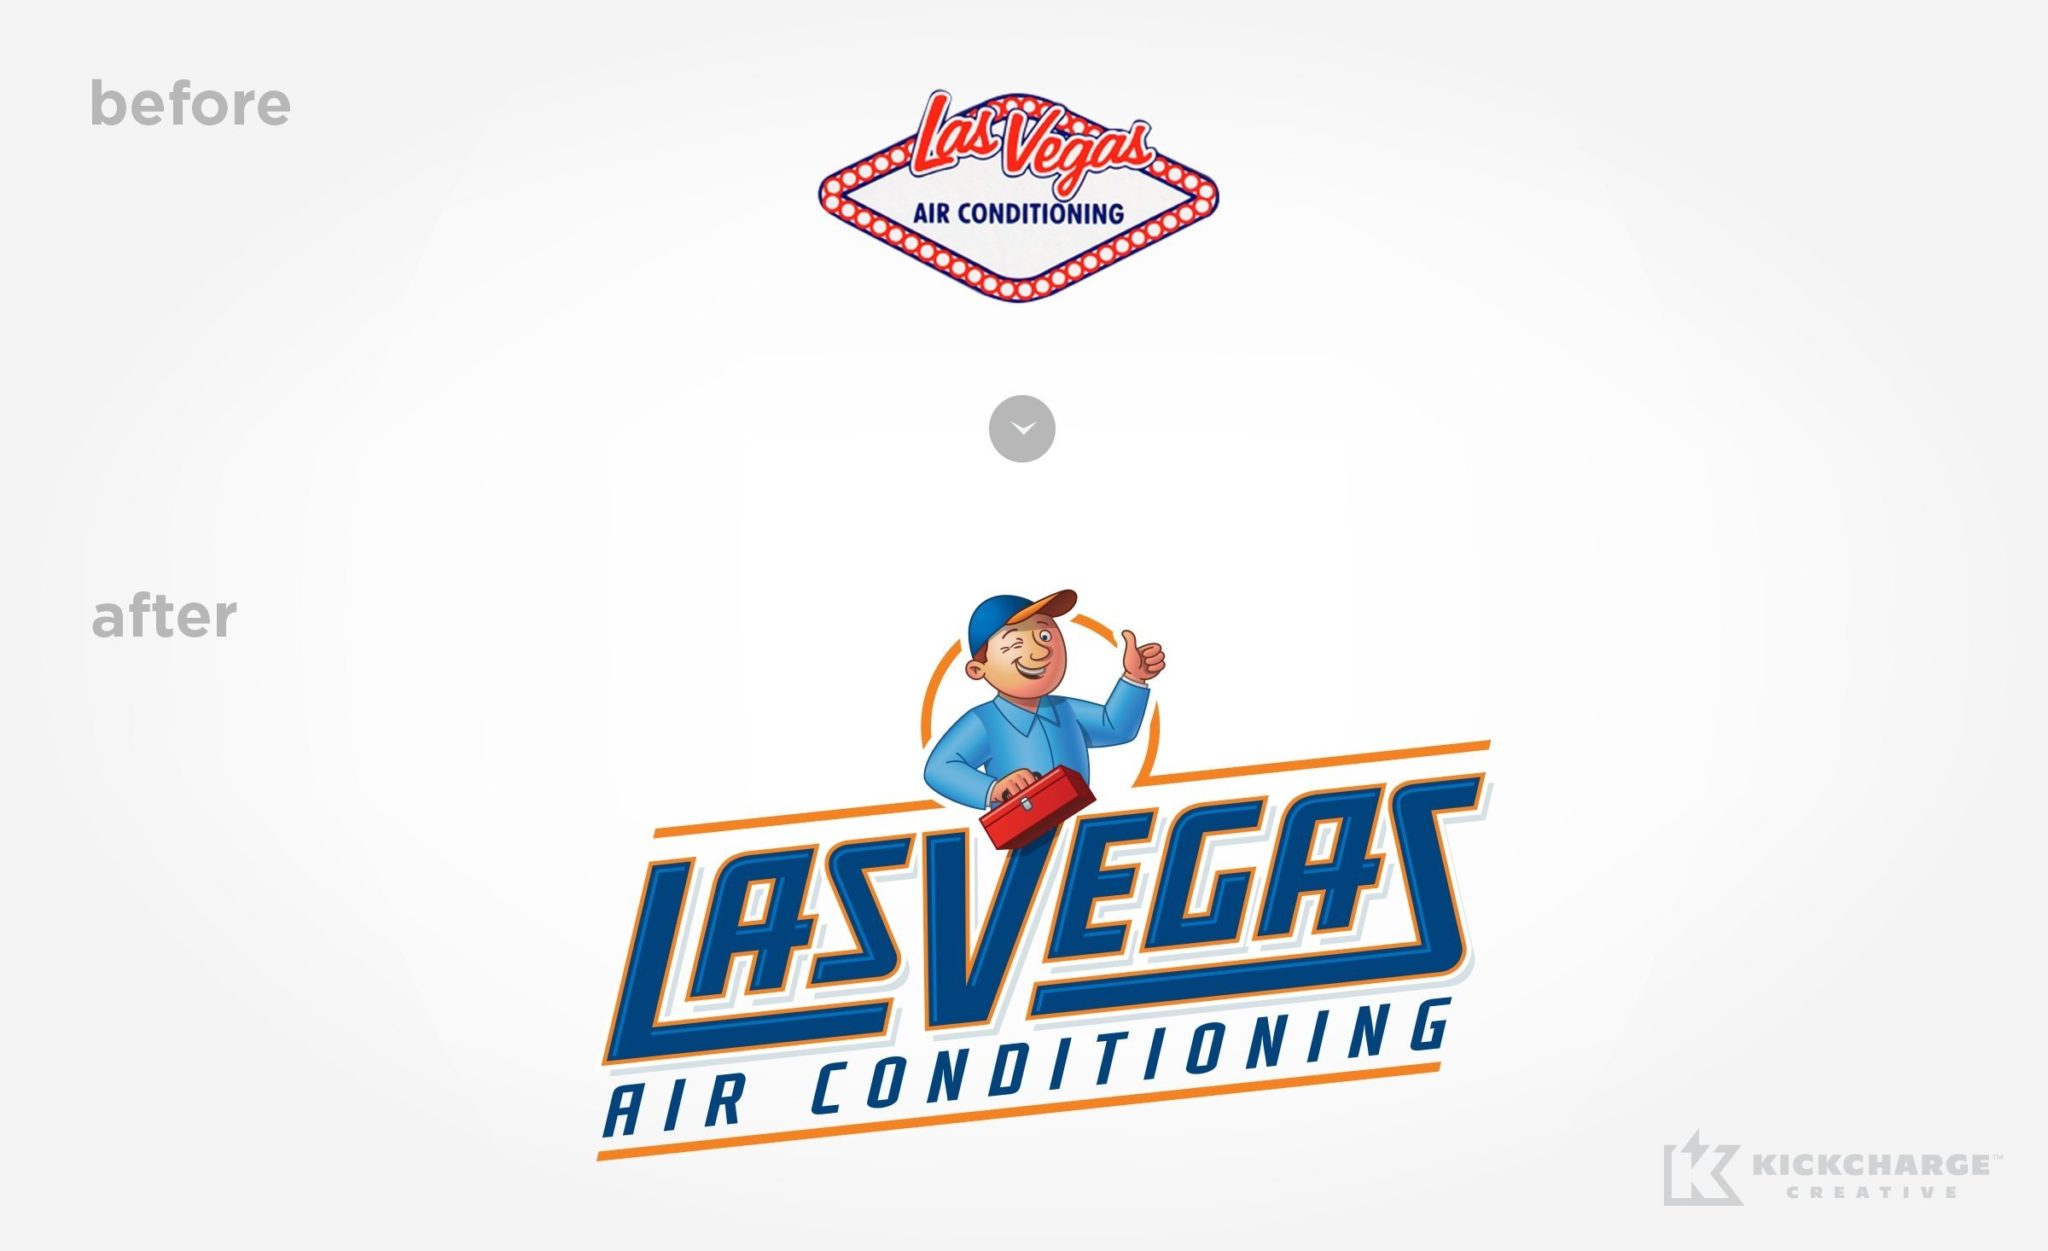 Before & after logo re-design for Las Vegas Air Conditioning.